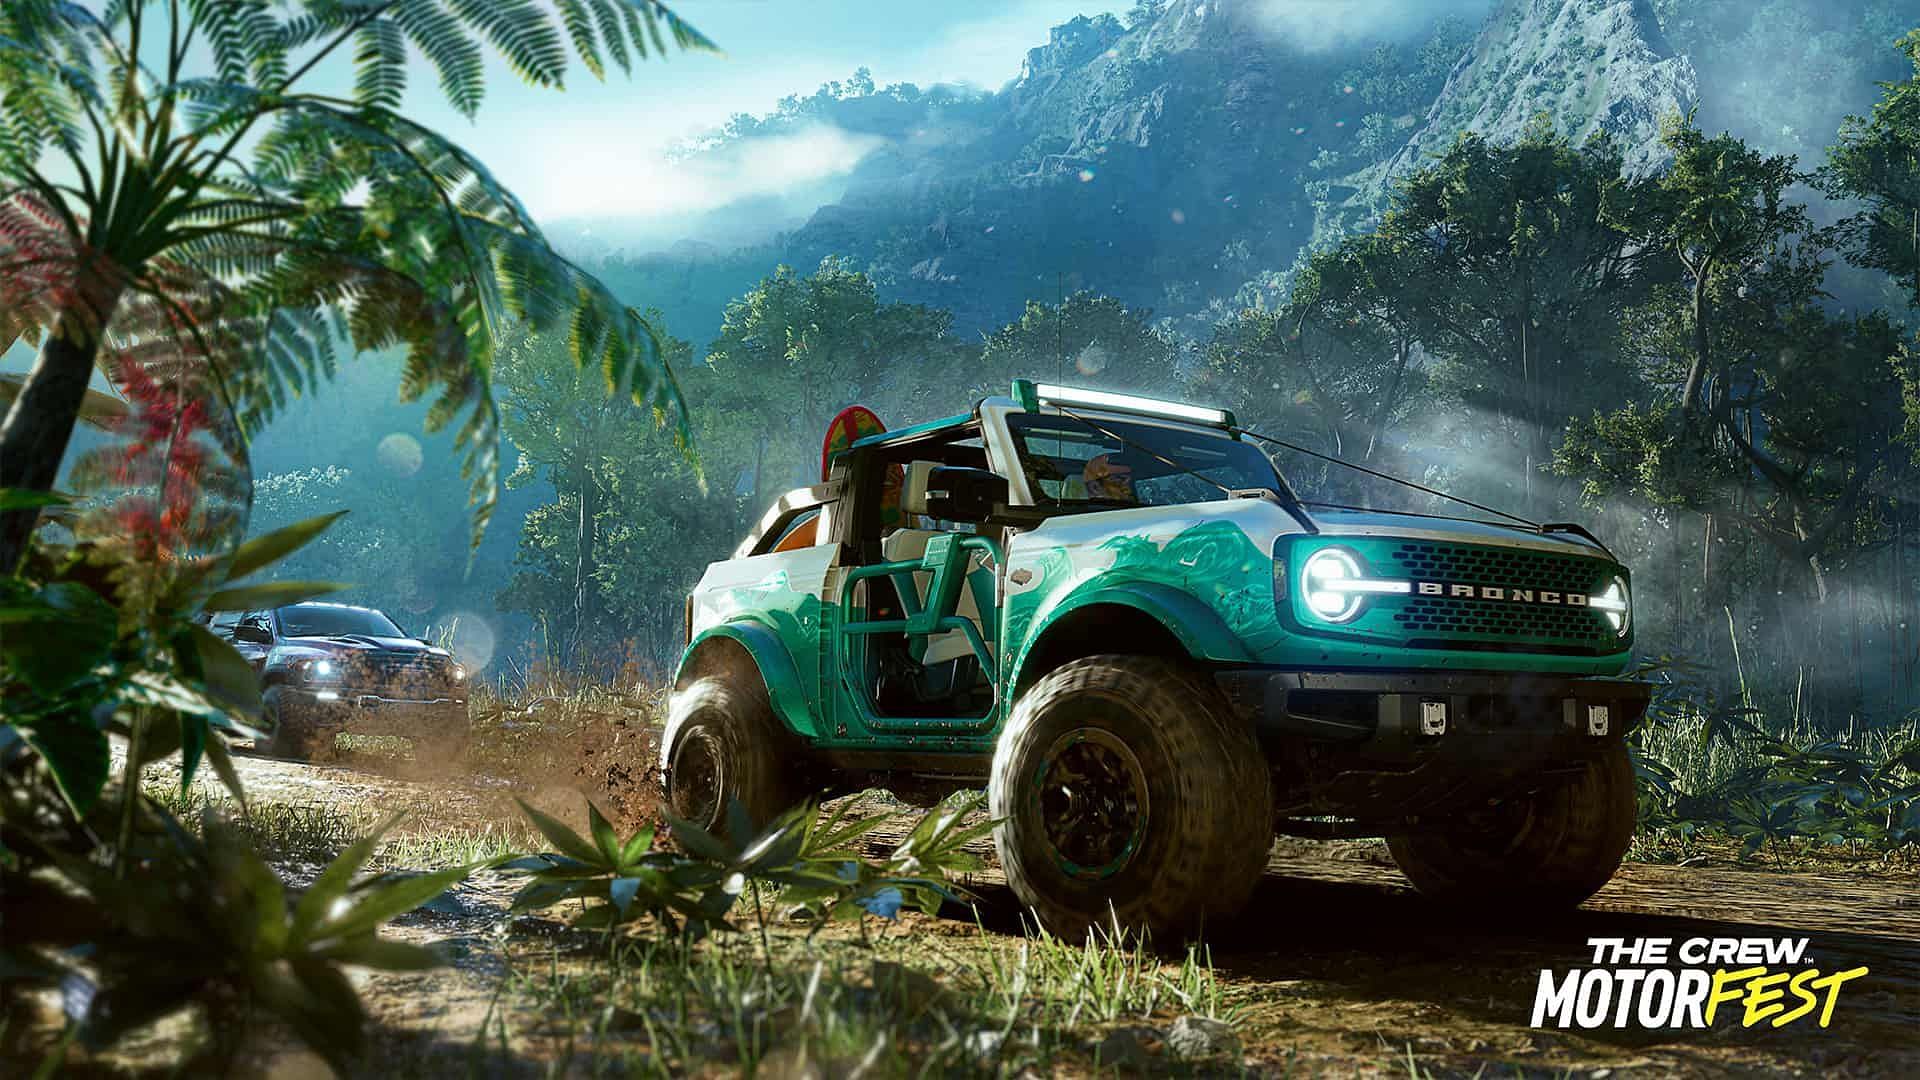 The Crew Motorfest will take players to a tropical festival (Image via Ubisoft)